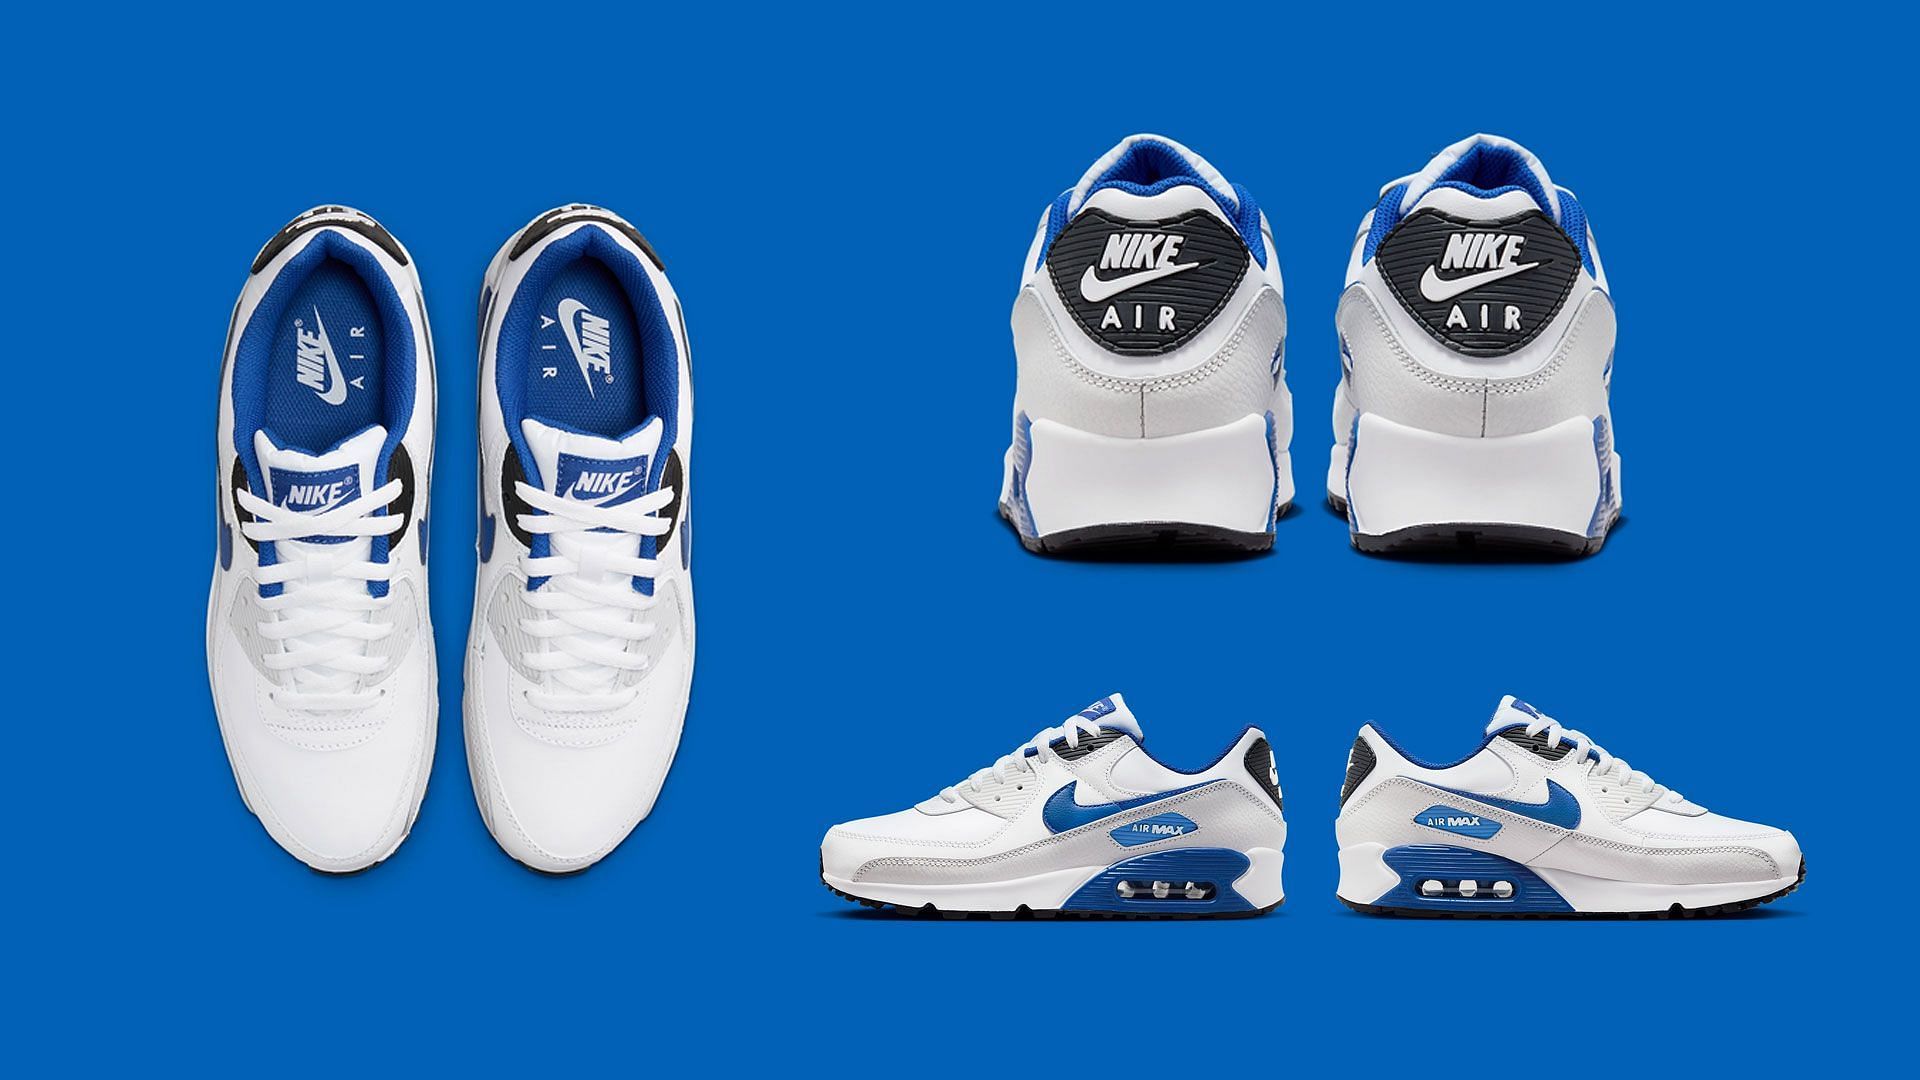 Upcoming Nike Air Max 90 &quot;White Black Blue&quot; sneakers (Image via Sportskeeda)